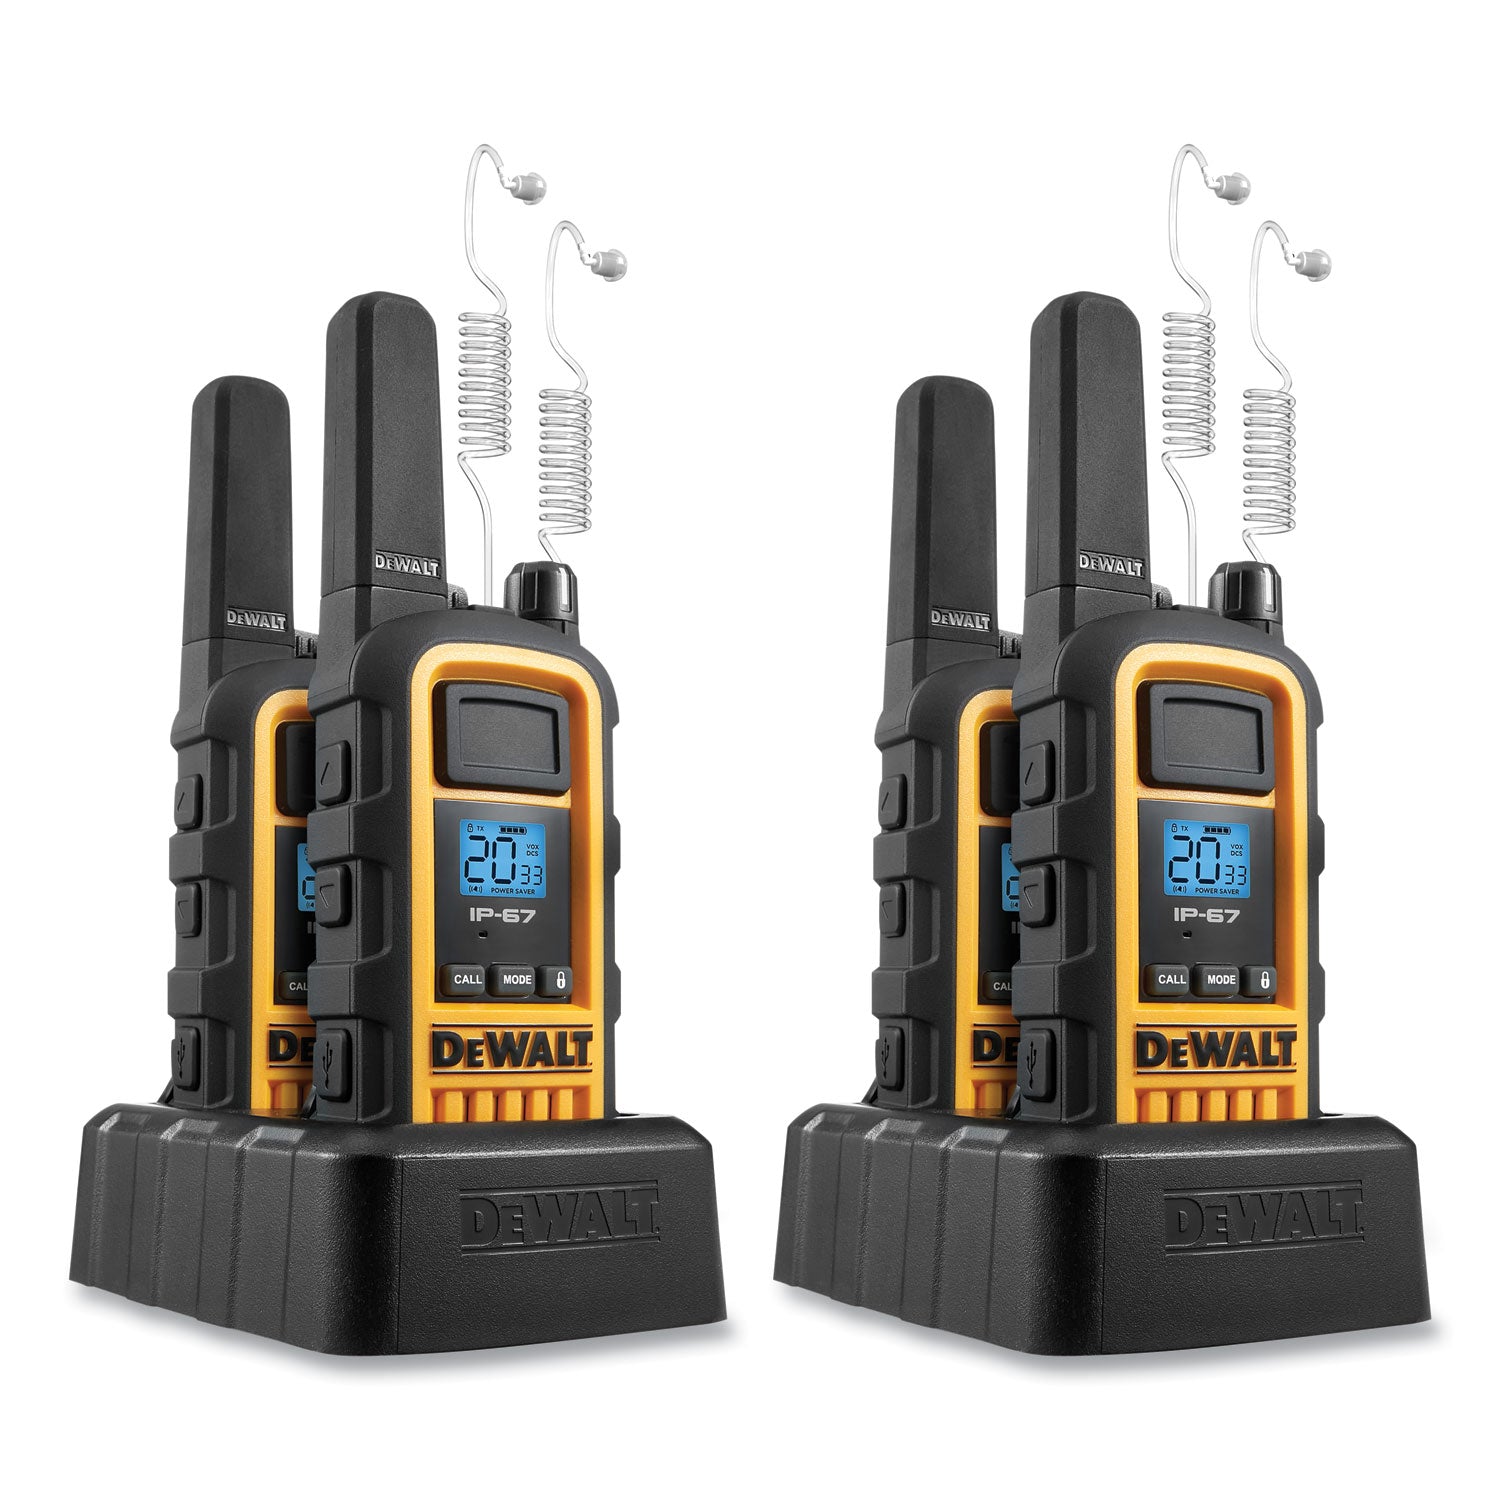 2dxfrs800sv1-two-way-radios-2-w-22-channels_seh2dxfrs800sv1 - 1